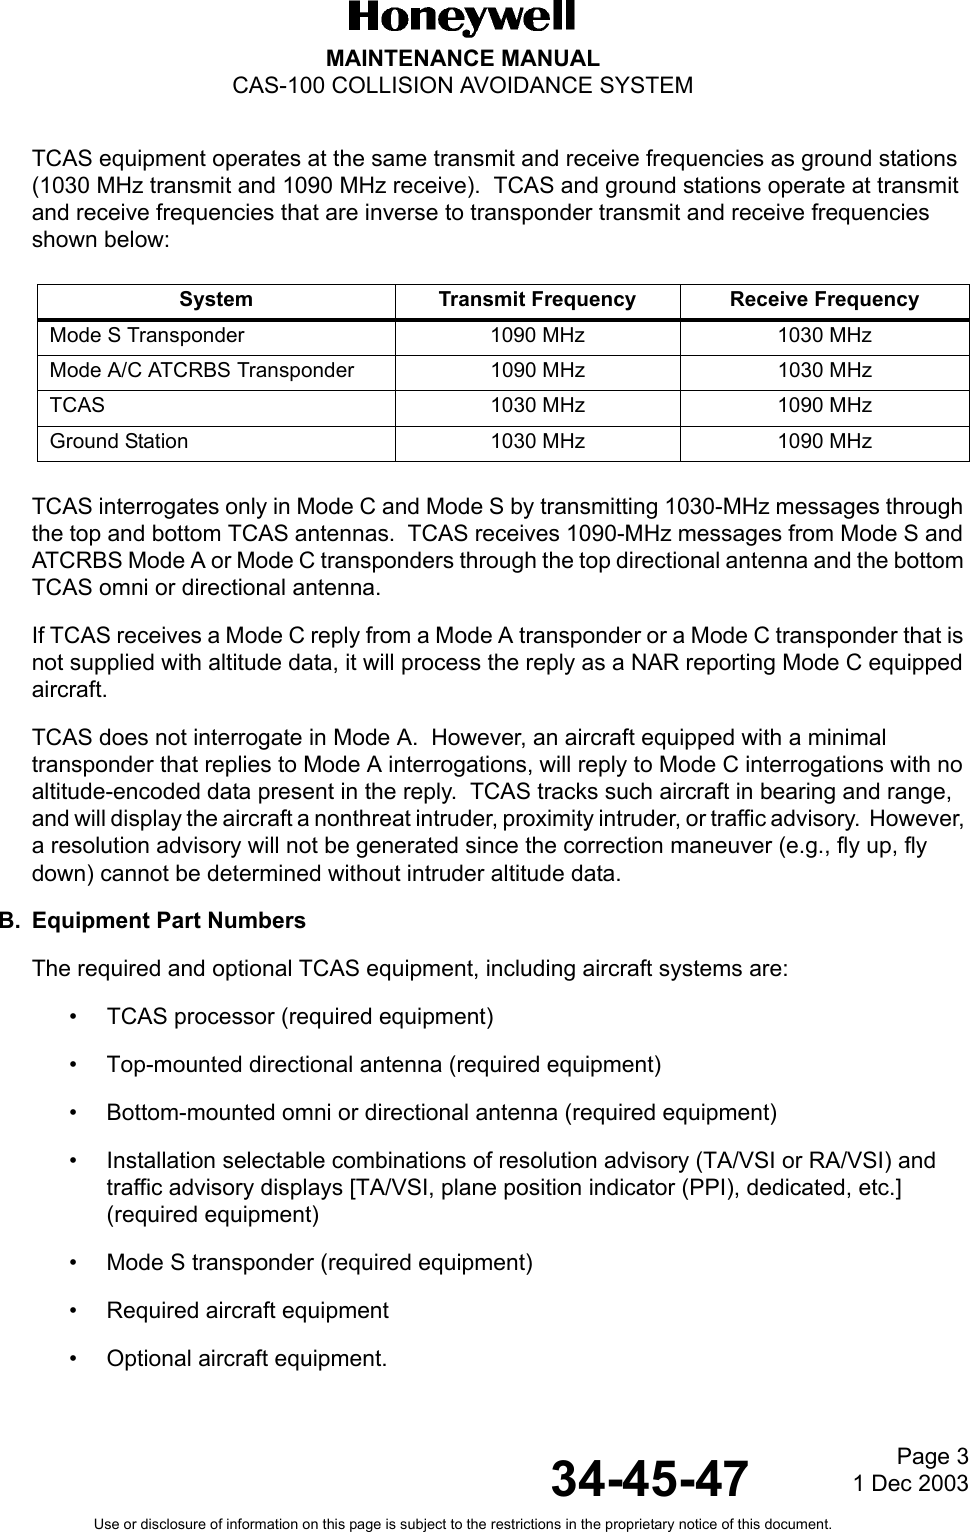 Page 3  1 Dec 200334-45-47MAINTENANCE MANUALCAS-100 COLLISION AVOIDANCE SYSTEMUse or disclosure of information on this page is subject to the restrictions in the proprietary notice of this document.TCAS equipment operates at the same transmit and receive frequencies as ground stations (1030 MHz transmit and 1090 MHz receive).  TCAS and ground stations operate at transmit and receive frequencies that are inverse to transponder transmit and receive frequencies shown below:TCAS interrogates only in Mode C and Mode S by transmitting 1030-MHz messages through the top and bottom TCAS antennas.  TCAS receives 1090-MHz messages from Mode S and ATCRBS Mode A or Mode C transponders through the top directional antenna and the bottom TCAS omni or directional antenna.If TCAS receives a Mode C reply from a Mode A transponder or a Mode C transponder that is not supplied with altitude data, it will process the reply as a NAR reporting Mode C equipped aircraft.TCAS does not interrogate in Mode A.  However, an aircraft equipped with a minimal transponder that replies to Mode A interrogations, will reply to Mode C interrogations with no altitude-encoded data present in the reply.  TCAS tracks such aircraft in bearing and range, and will display the aircraft a nonthreat intruder, proximity intruder, or traffic advisory.  However, a resolution advisory will not be generated since the correction maneuver (e.g., fly up, fly down) cannot be determined without intruder altitude data. B. Equipment Part NumbersThe required and optional TCAS equipment, including aircraft systems are:• TCAS processor (required equipment)• Top-mounted directional antenna (required equipment)• Bottom-mounted omni or directional antenna (required equipment)• Installation selectable combinations of resolution advisory (TA/VSI or RA/VSI) and traffic advisory displays [TA/VSI, plane position indicator (PPI), dedicated, etc.] (required equipment)• Mode S transponder (required equipment)• Required aircraft equipment• Optional aircraft equipment.System Transmit Frequency Receive FrequencyMode S Transponder 1090 MHz 1030 MHzMode A/C ATCRBS Transponder 1090 MHz 1030 MHzTCAS 1030 MHz 1090 MHzGround Station 1030 MHz 1090 MHz